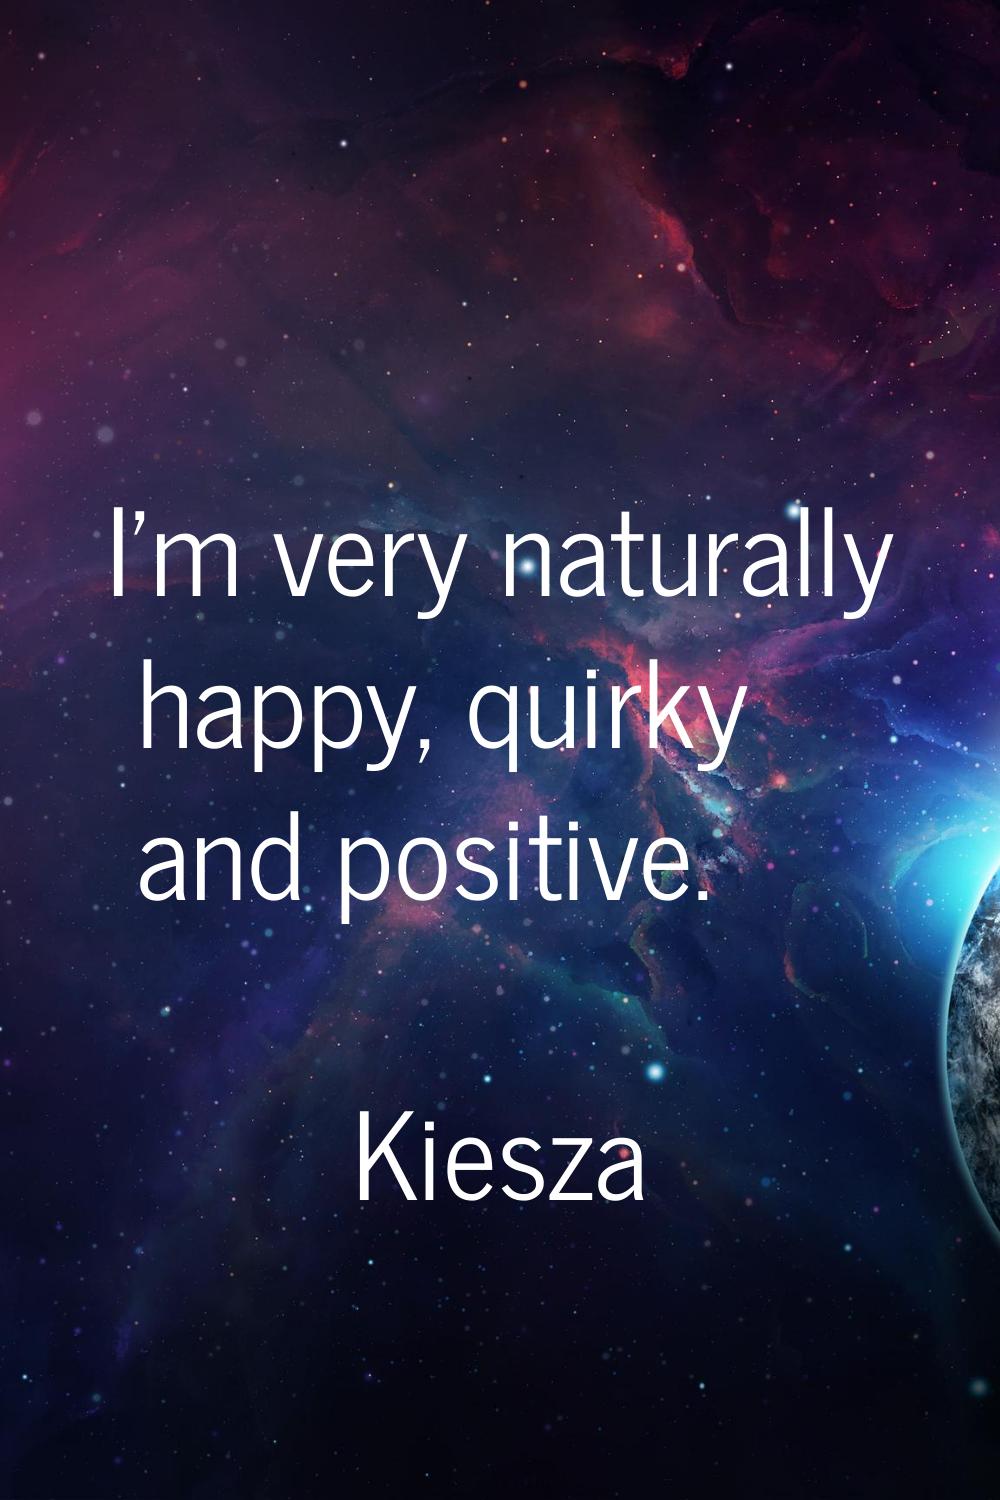 I'm very naturally happy, quirky and positive.